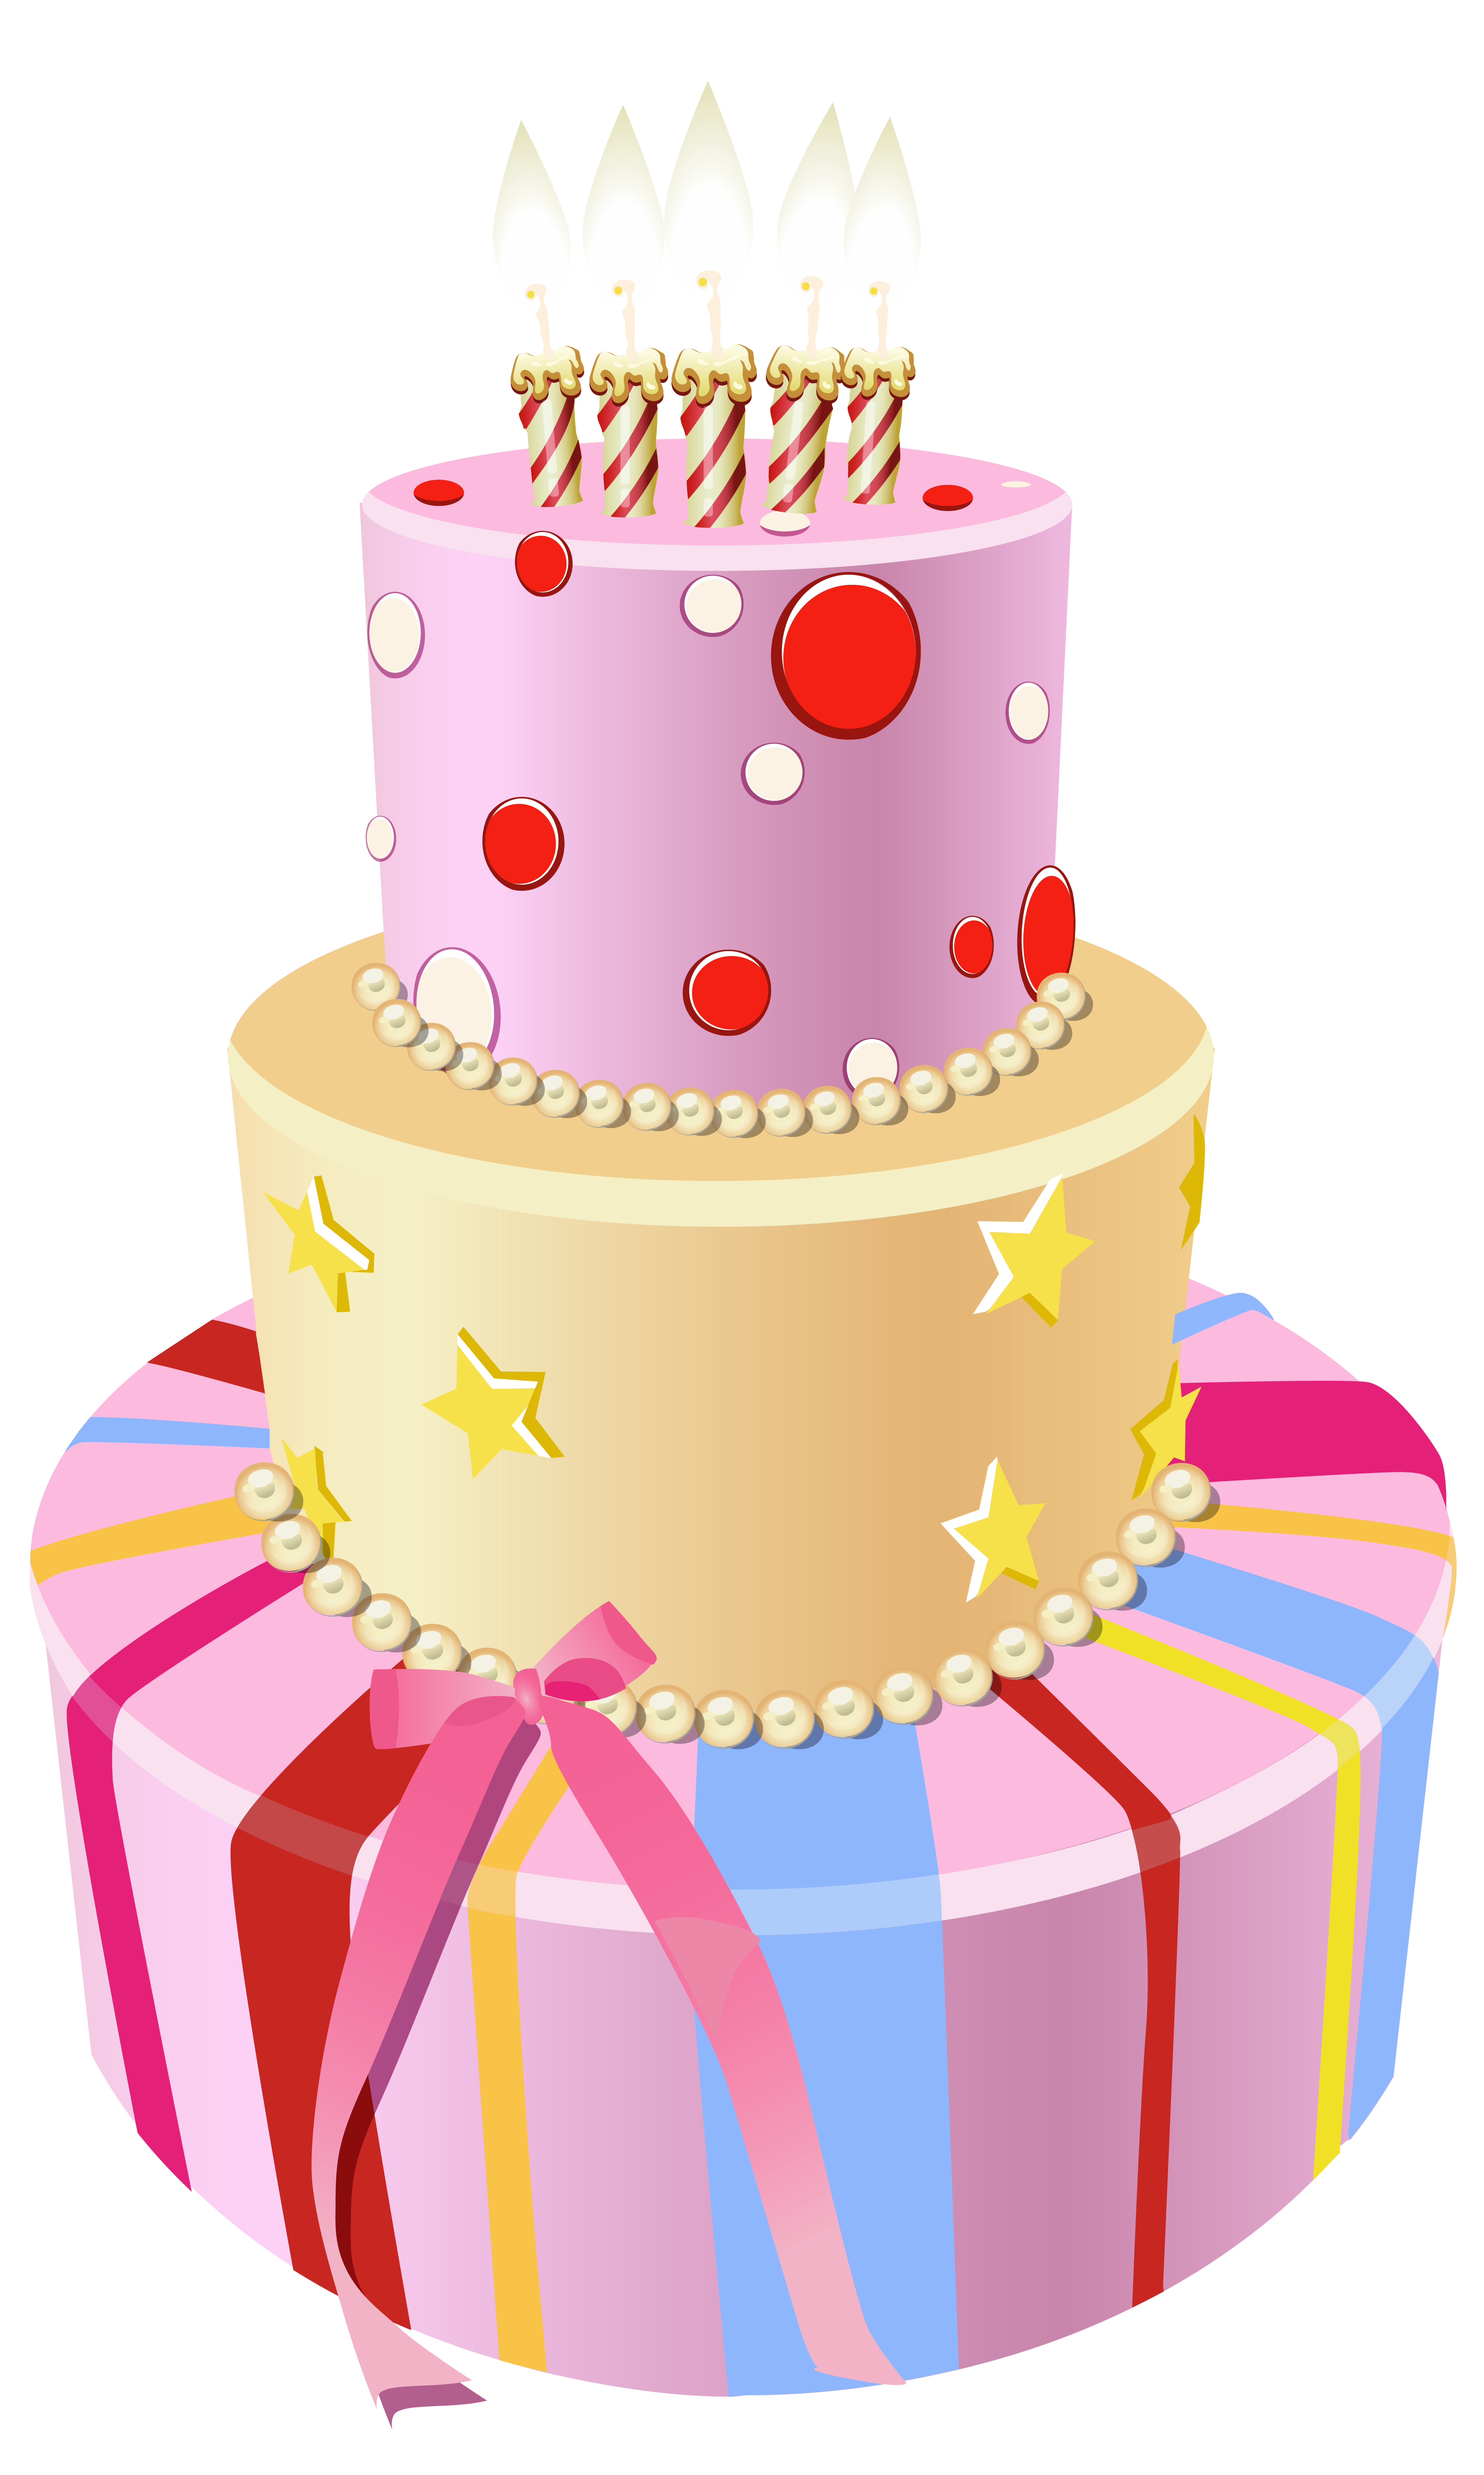 Pink Birthday Cake PNG Clipart Image